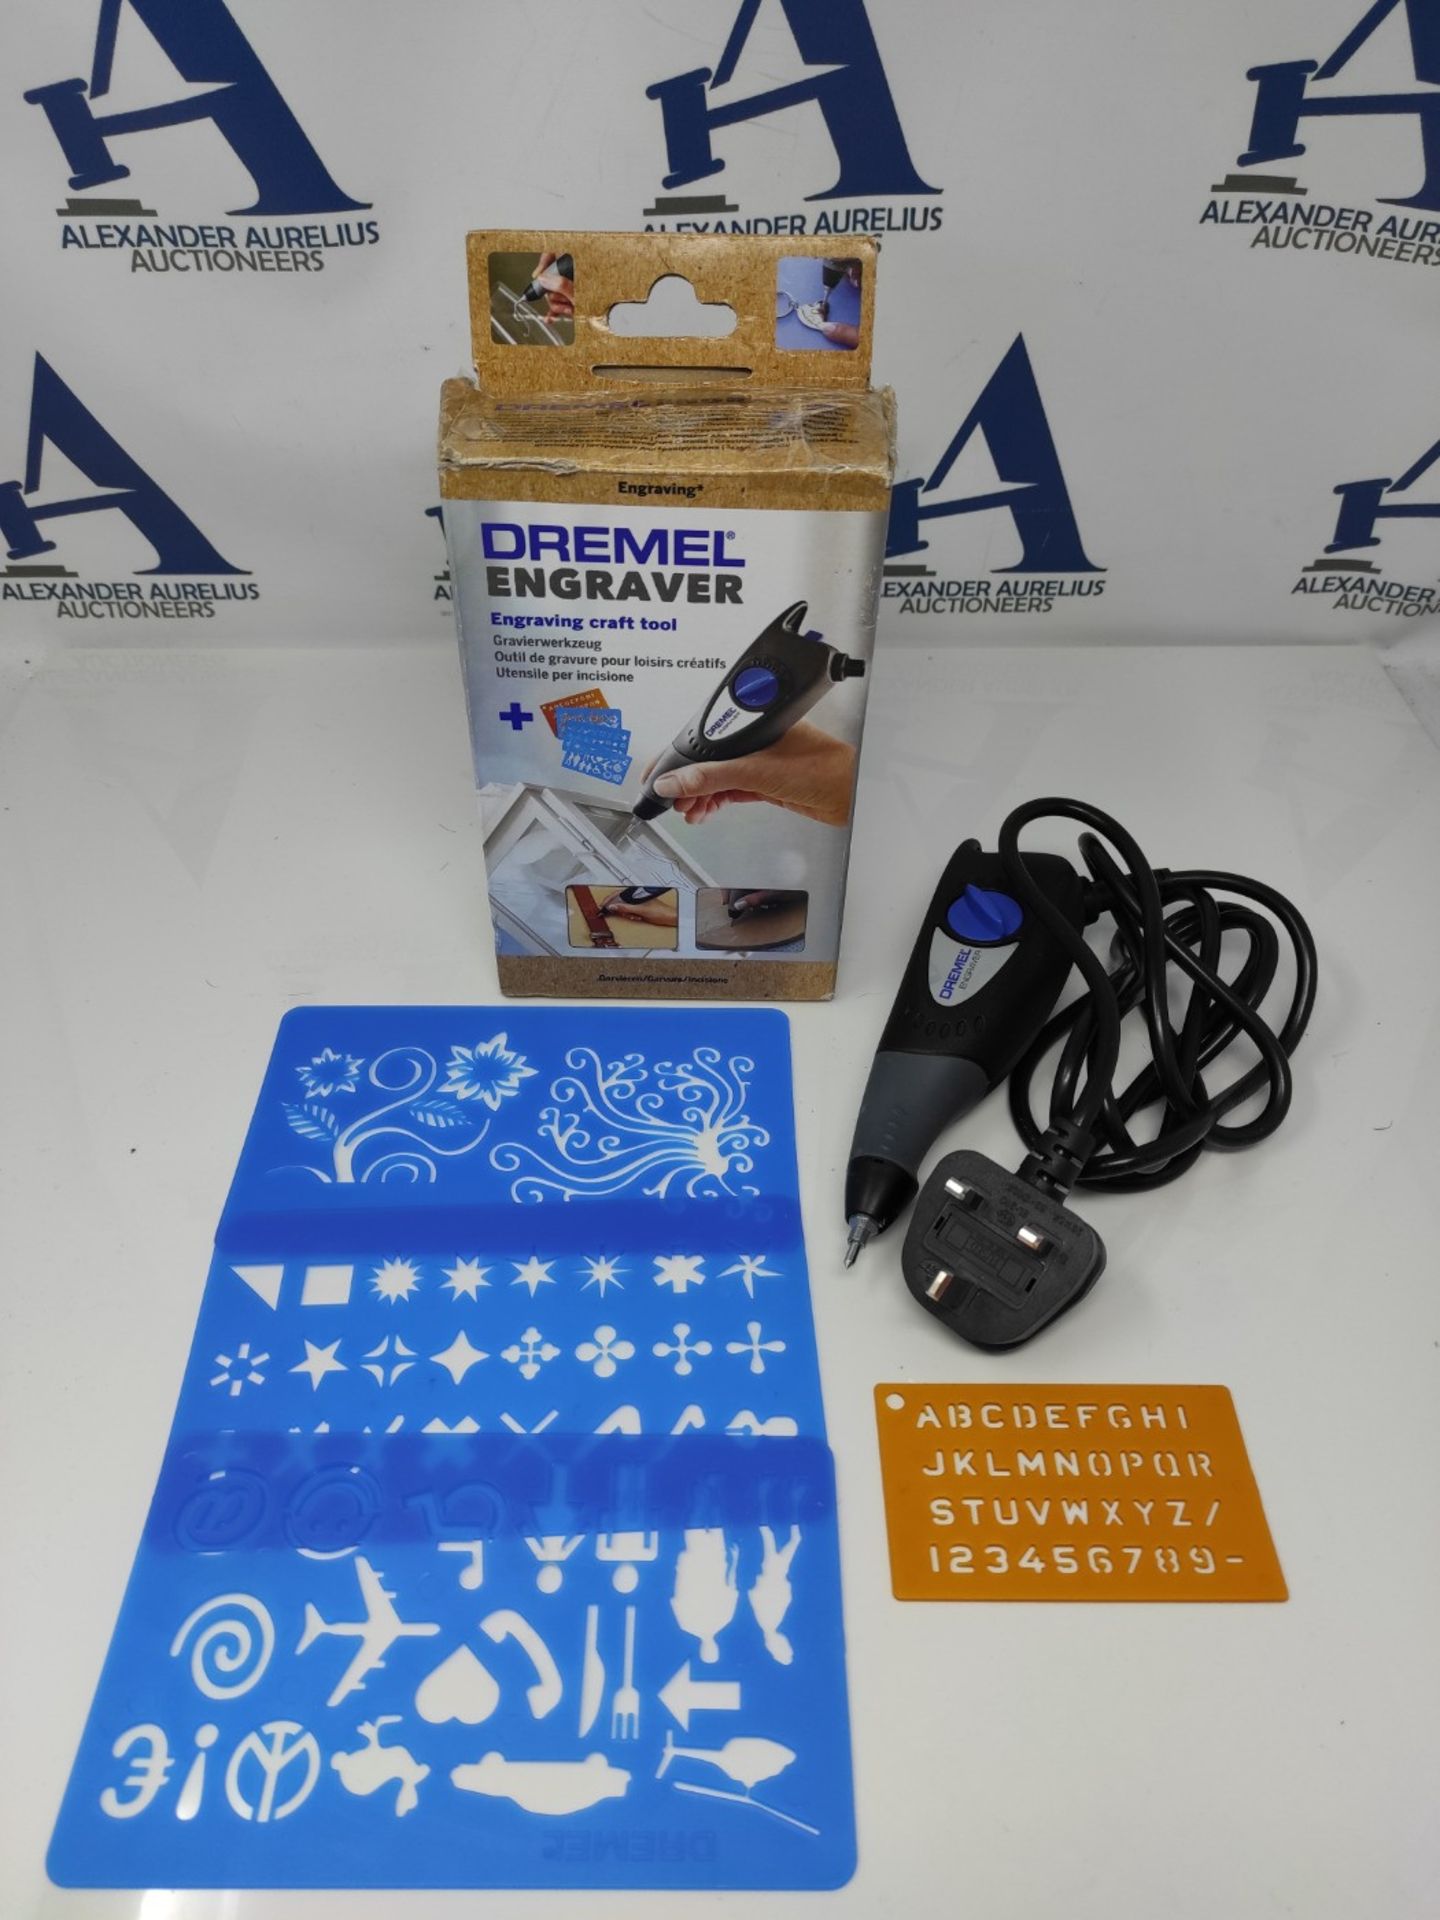 Dremel 290 Engraver - Compact Engraving Pen Tool with 3 Engraving Tips and 4 Craft Ste - Image 2 of 2